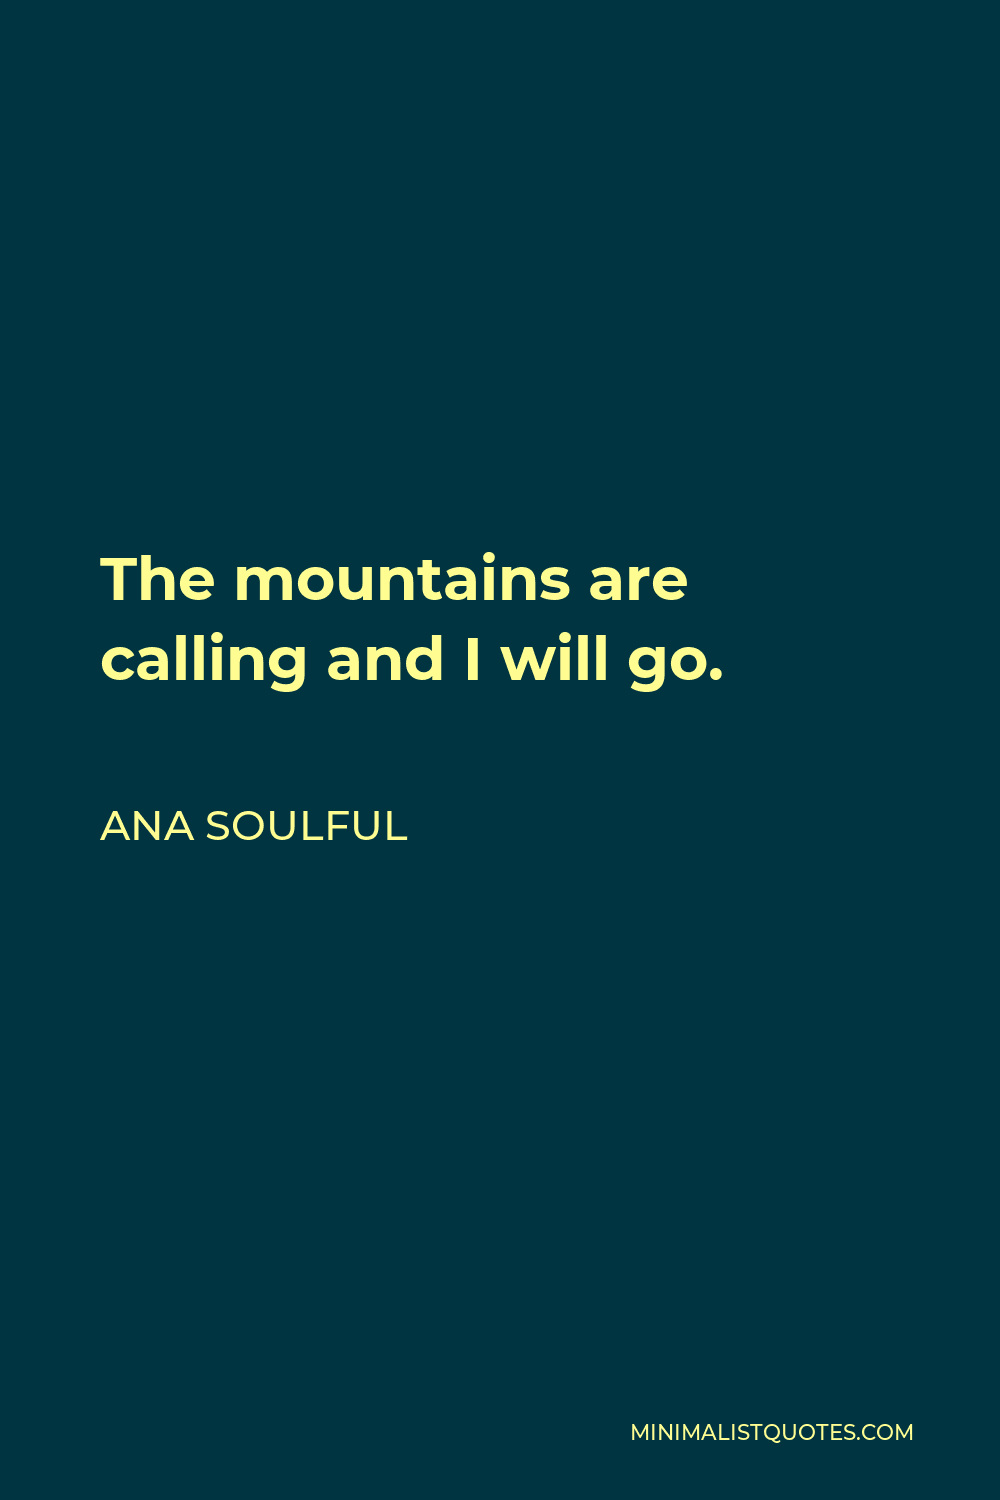 Ana Soulful Quote - The mountains are calling and I will go.